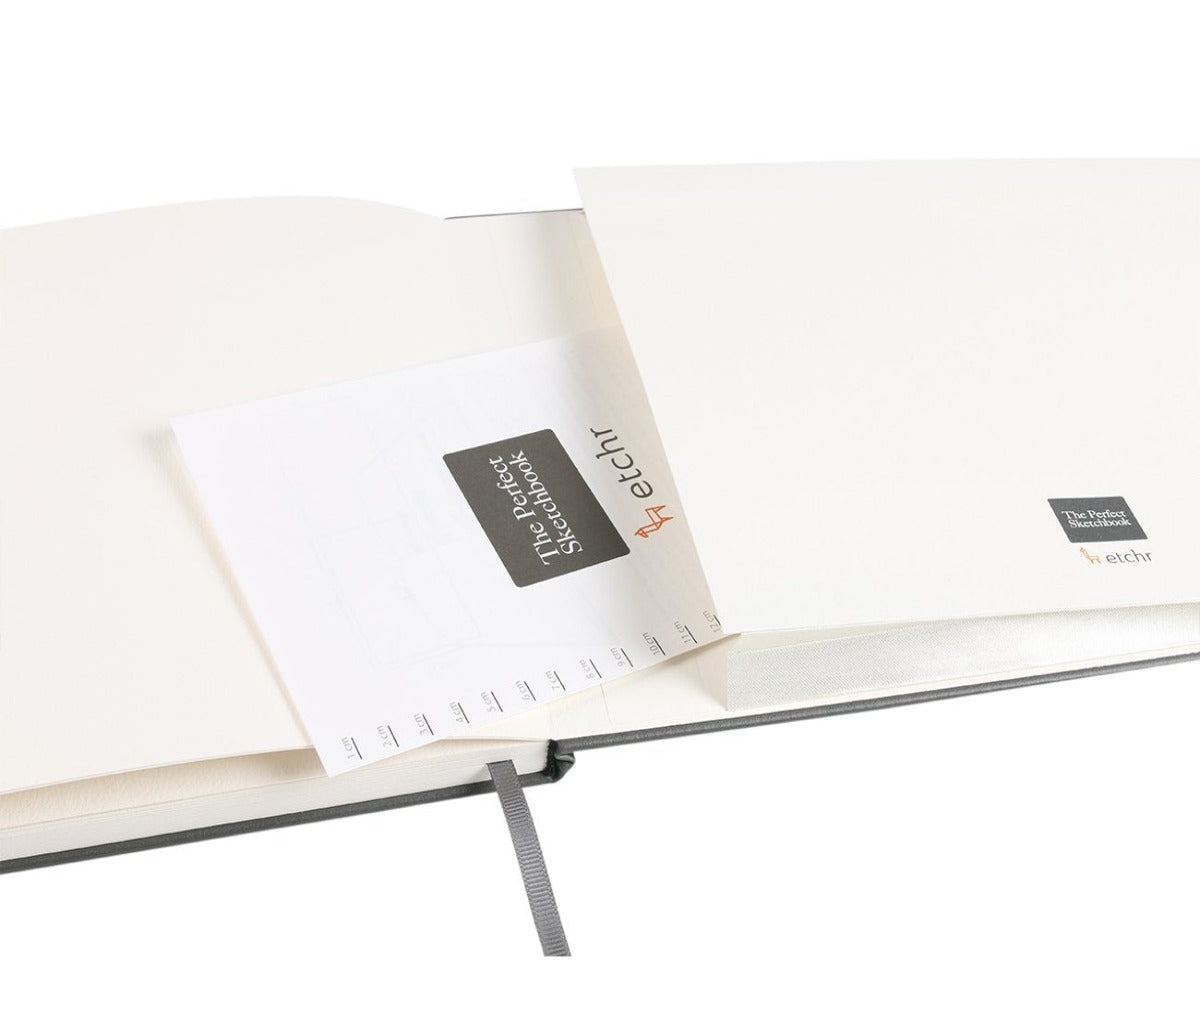 Etchr : The Perfect Sketchbook